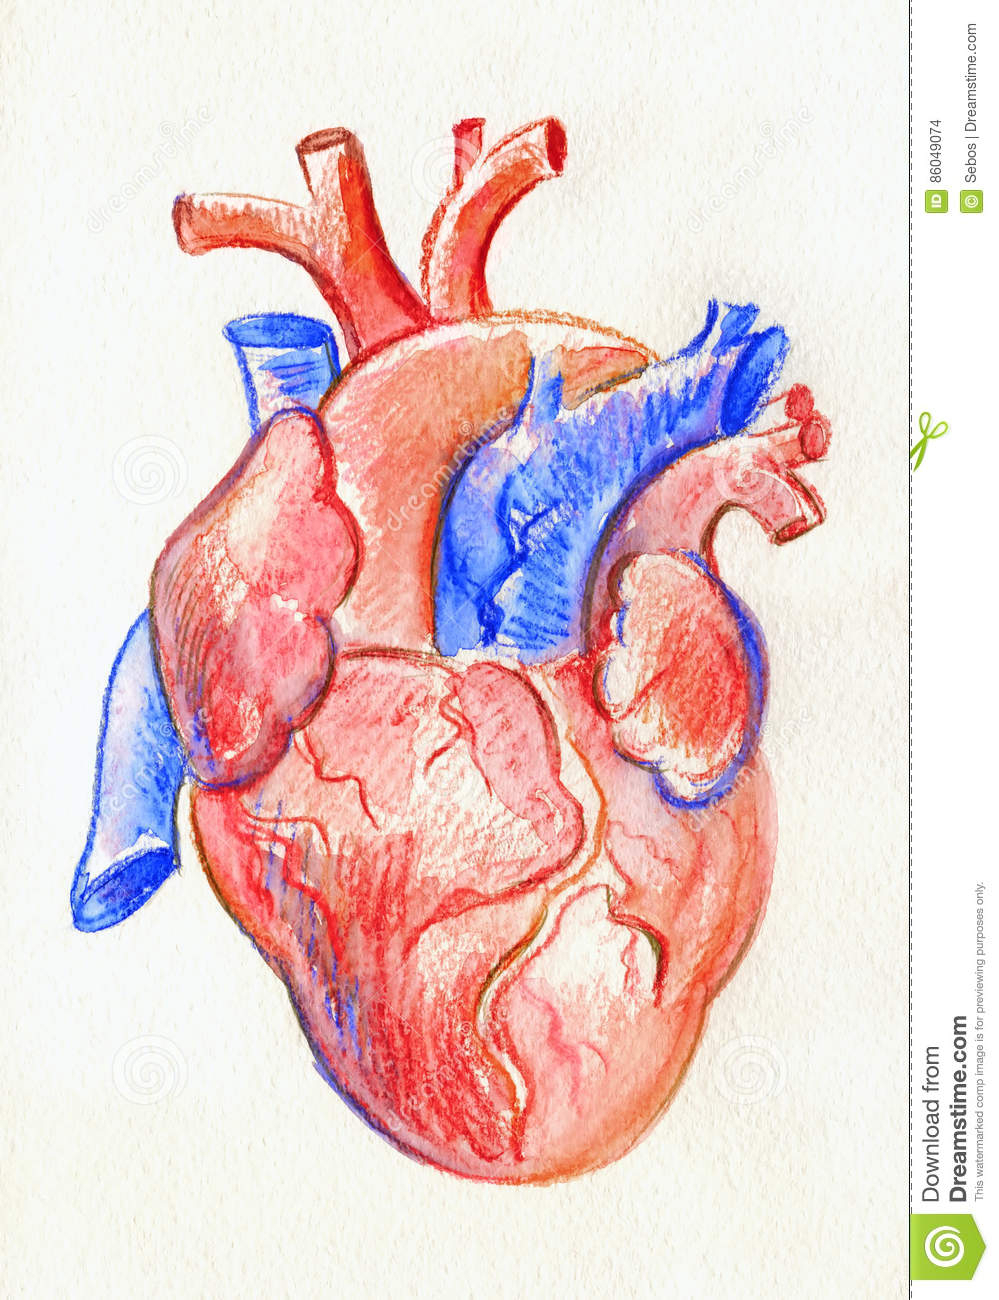 Realistic Heart Drawing | Free download on ClipArtMag - etcconseil